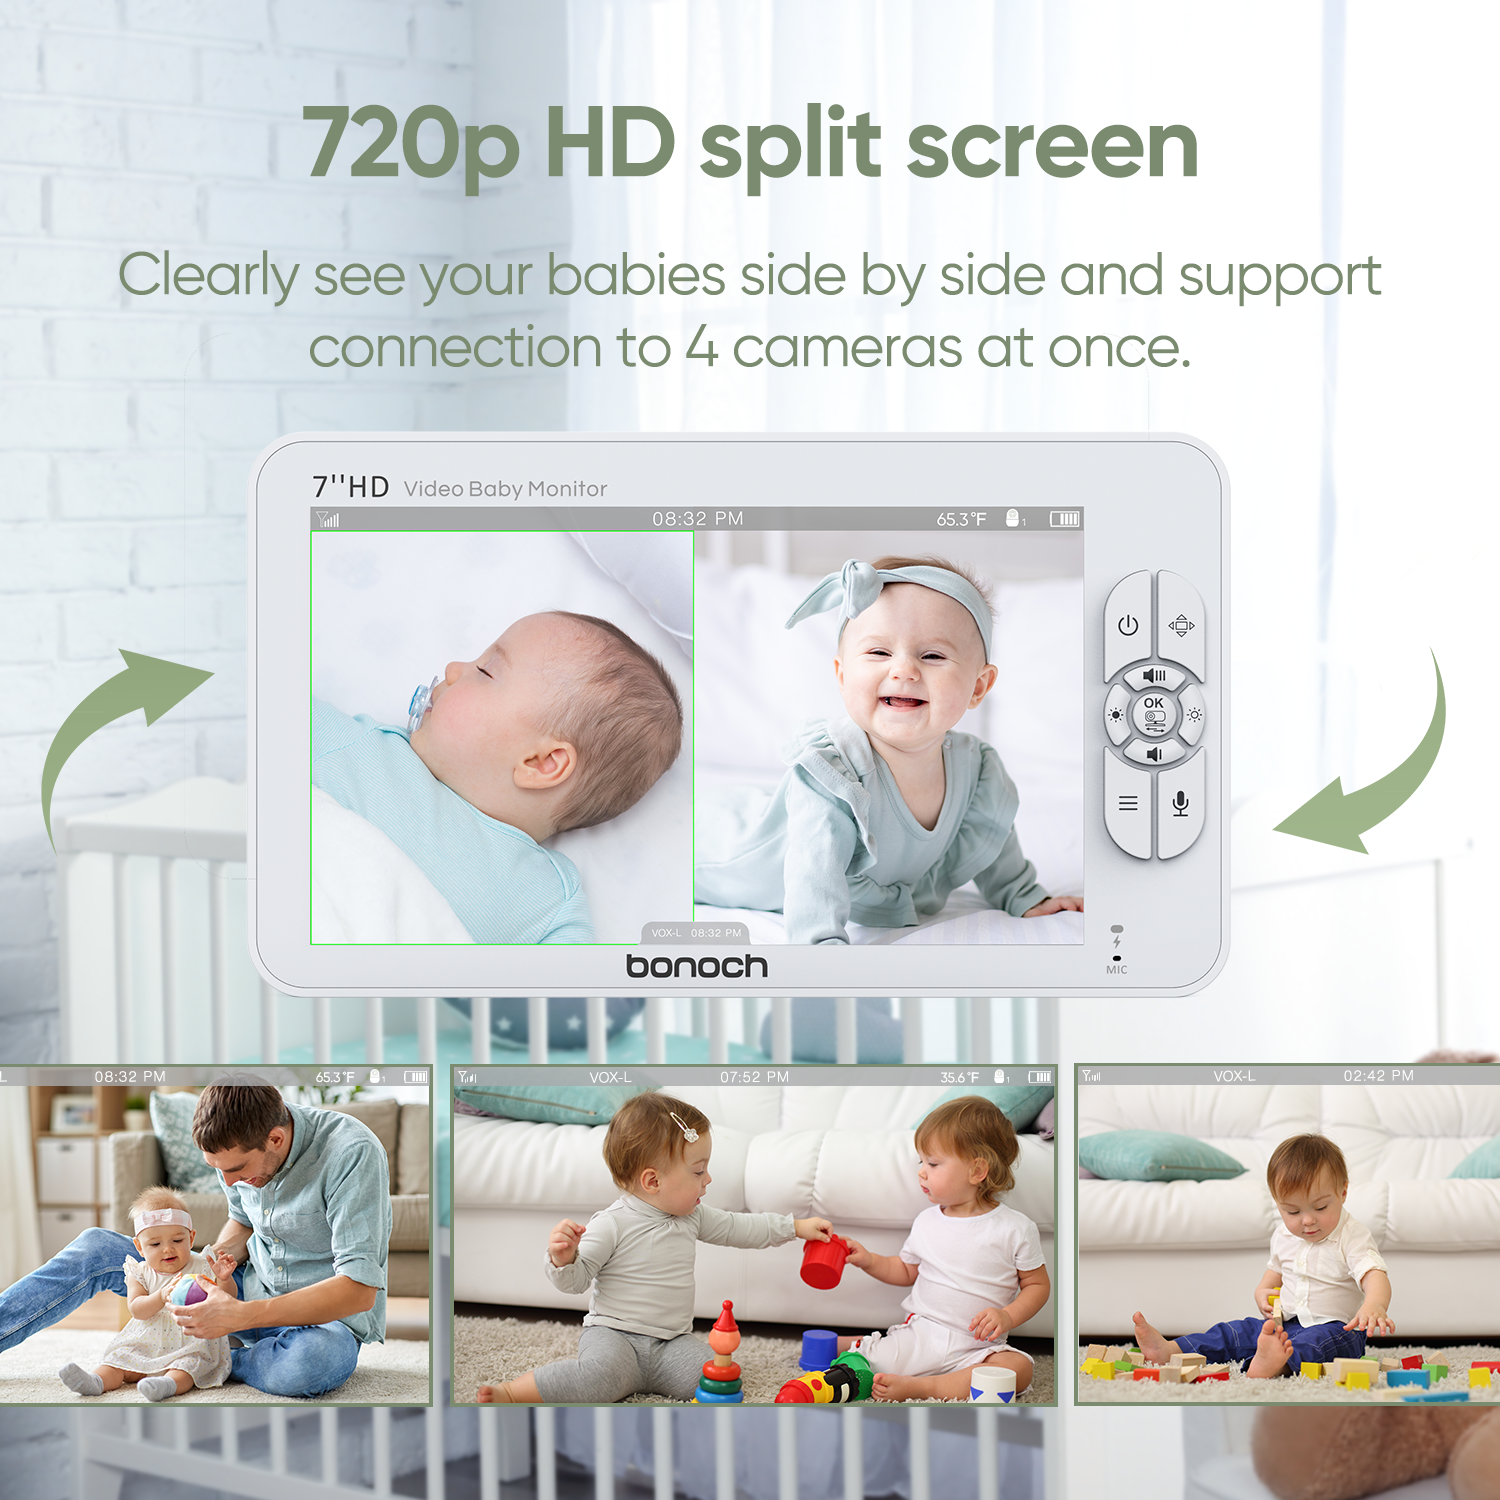 bonoch MegaView Baby Monitor with 2 Cameras 7" 720P HD LCD Split Screen Video Audio No WiFi Auto Night Vision - image 4 of 7